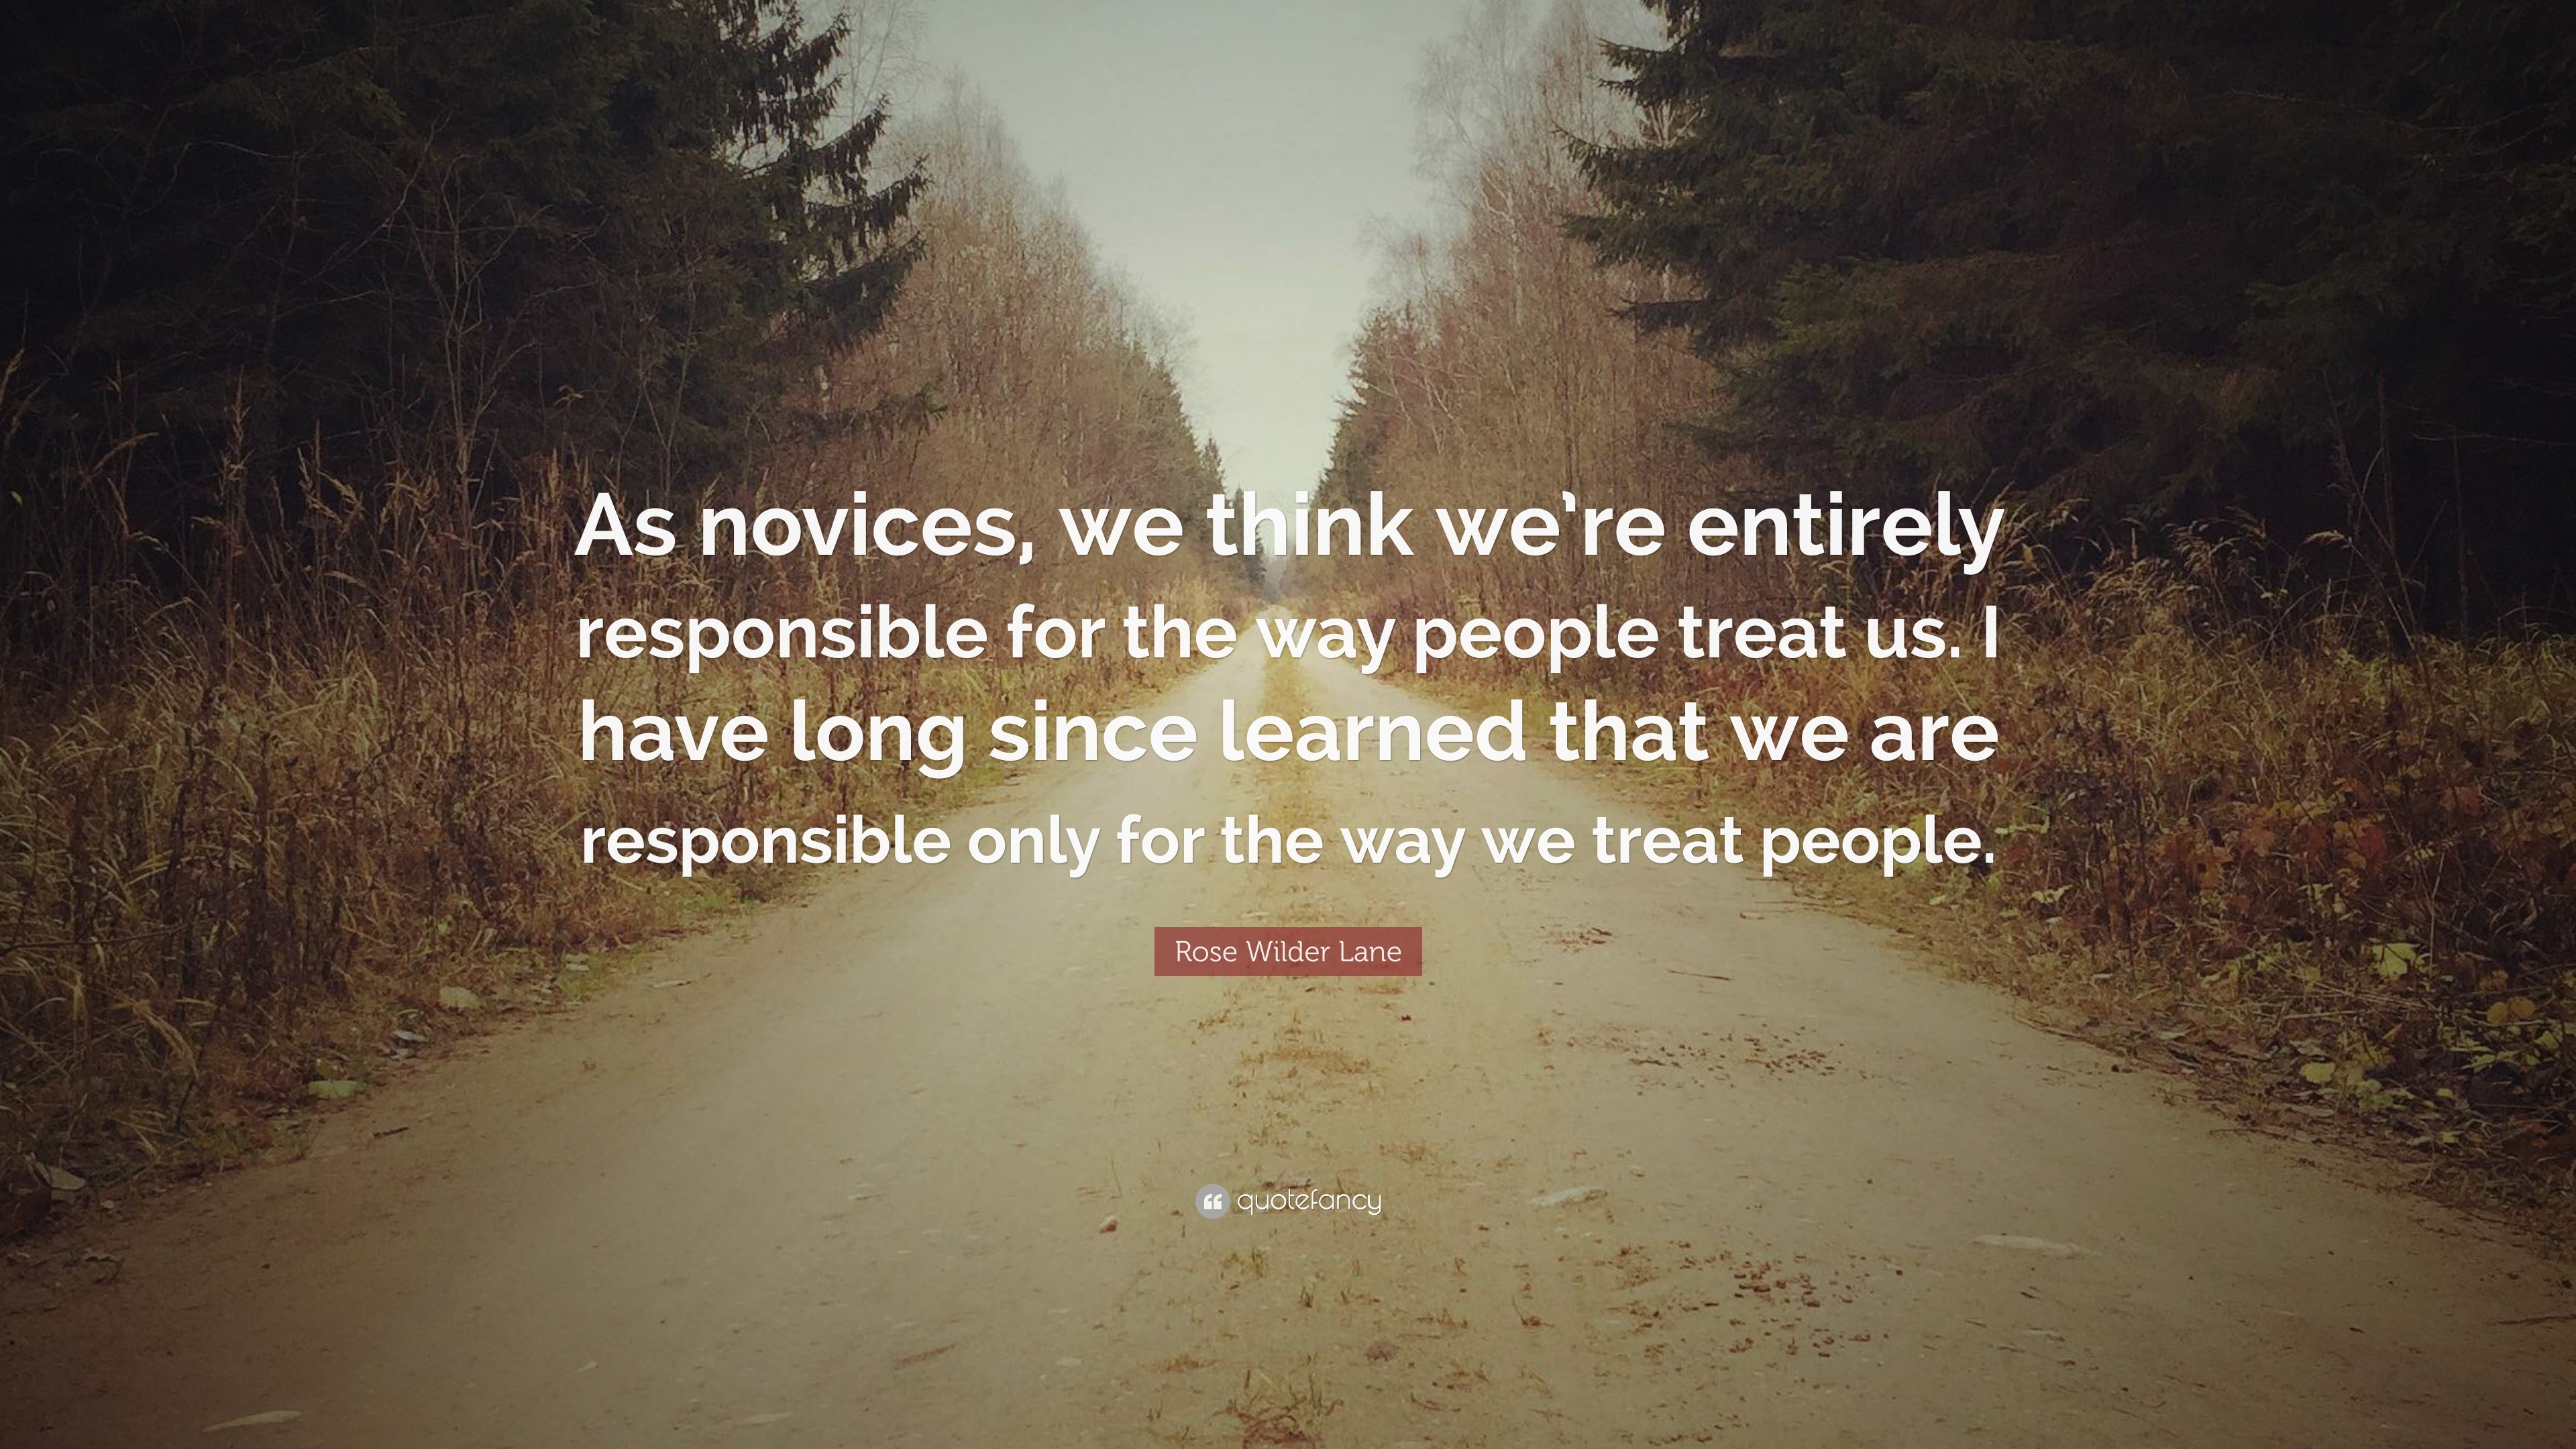 Rose Wilder Lane Quote: “As novices, we think we’re entirely ...